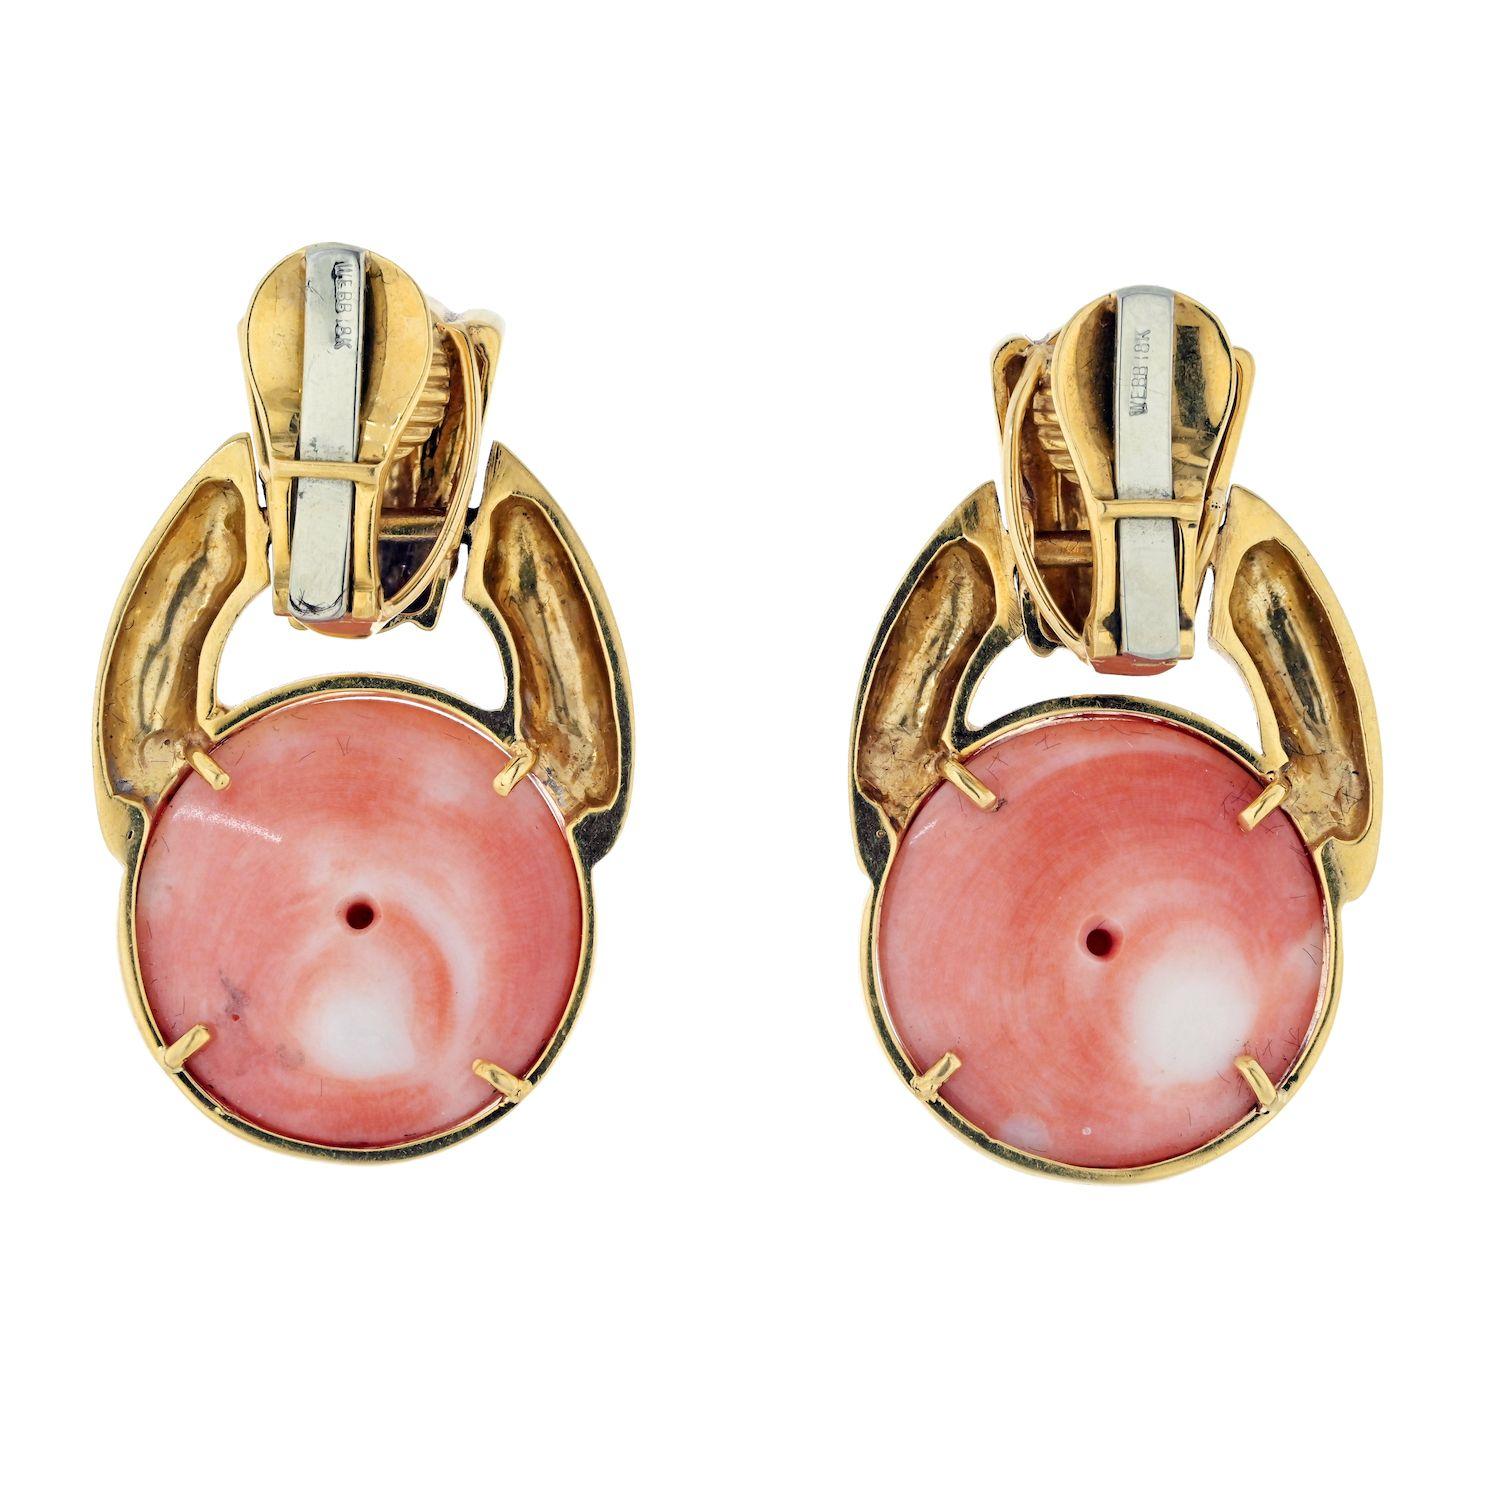 A remarkable pair of David Webb 18k Yellow Gold Estate Coral Earrings, an exquisite testament to the designer's artistic vision and timeless craftsmanship. These earrings showcase a striking door knocker design, combining the warmth of 18k yellow